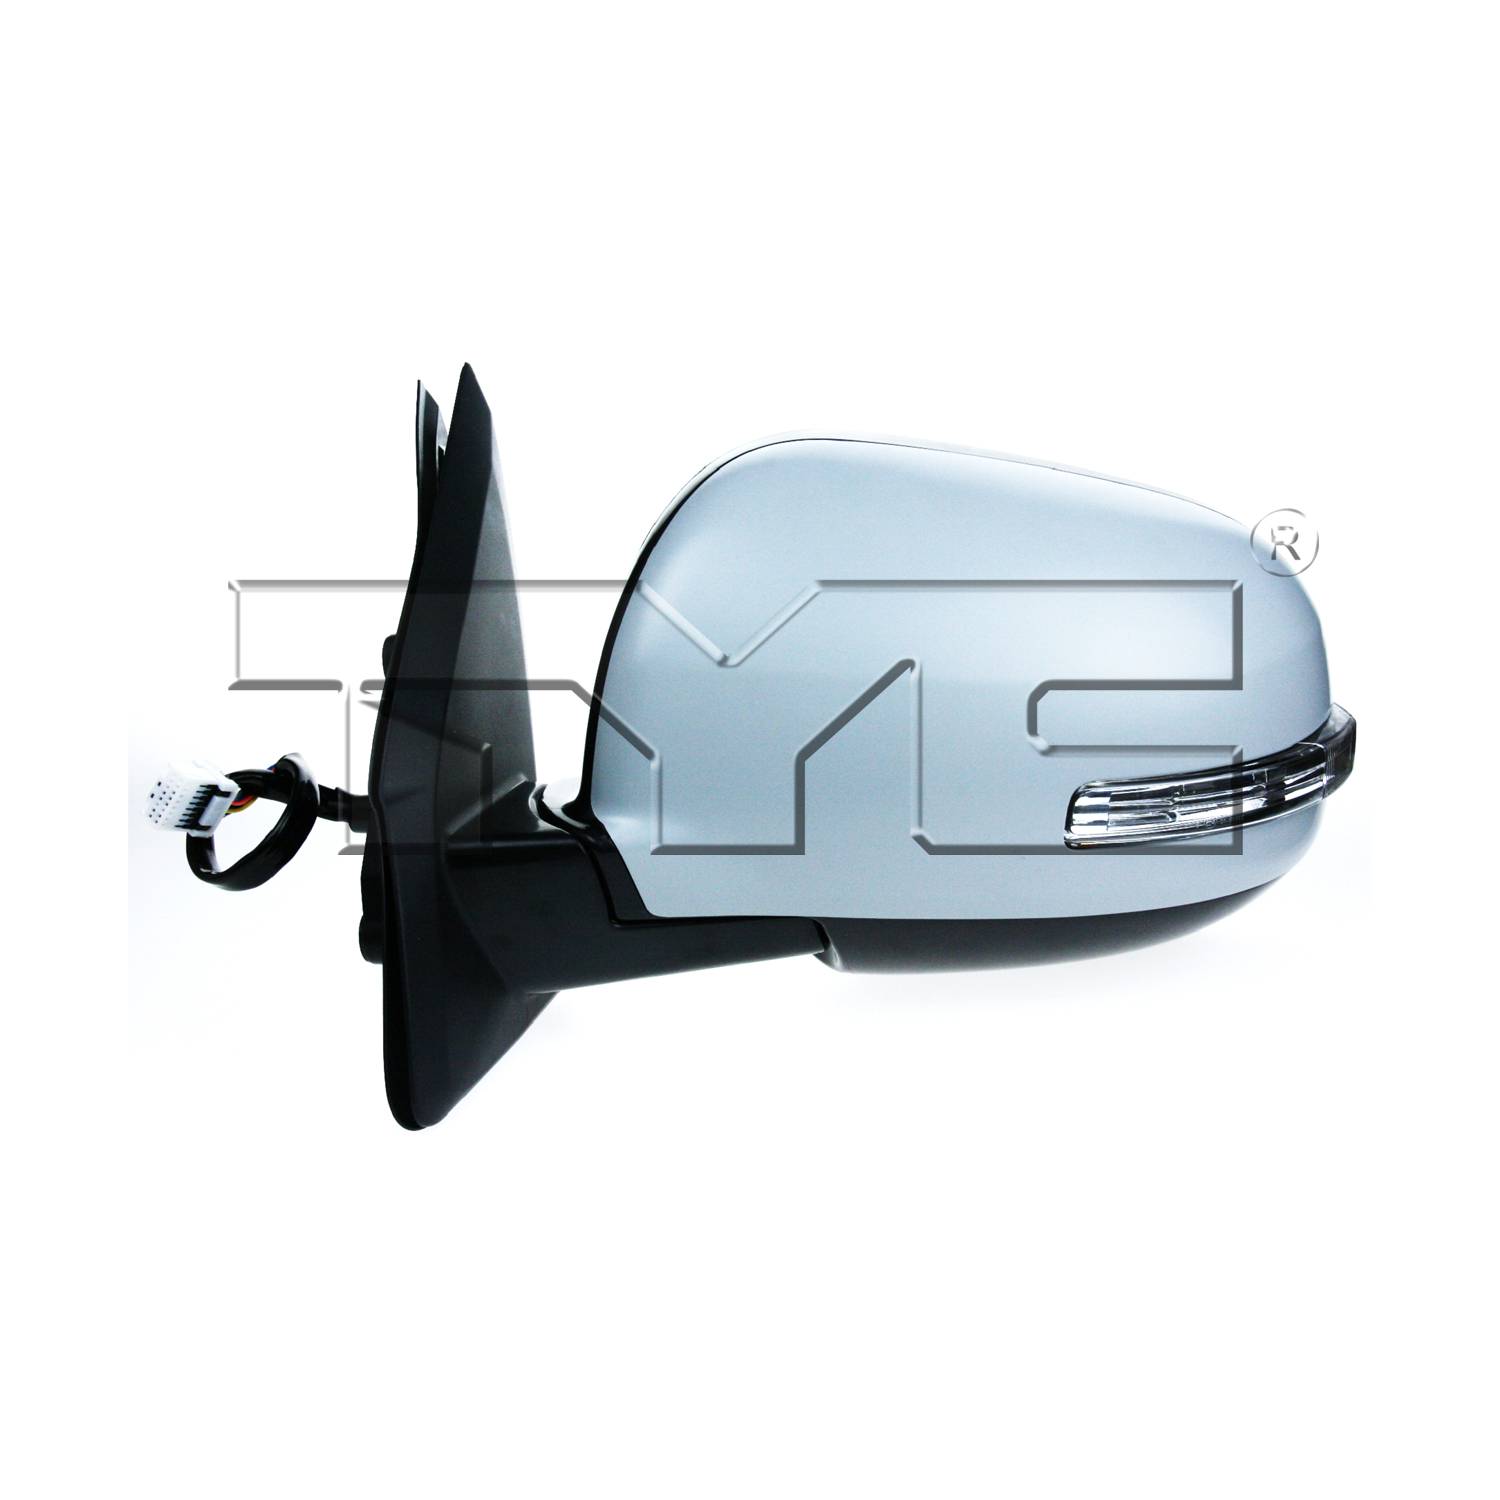 Aftermarket MIRRORS for MITSUBISHI - OUTLANDER, OUTLANDER,12-13,RT Mirror outside rear view